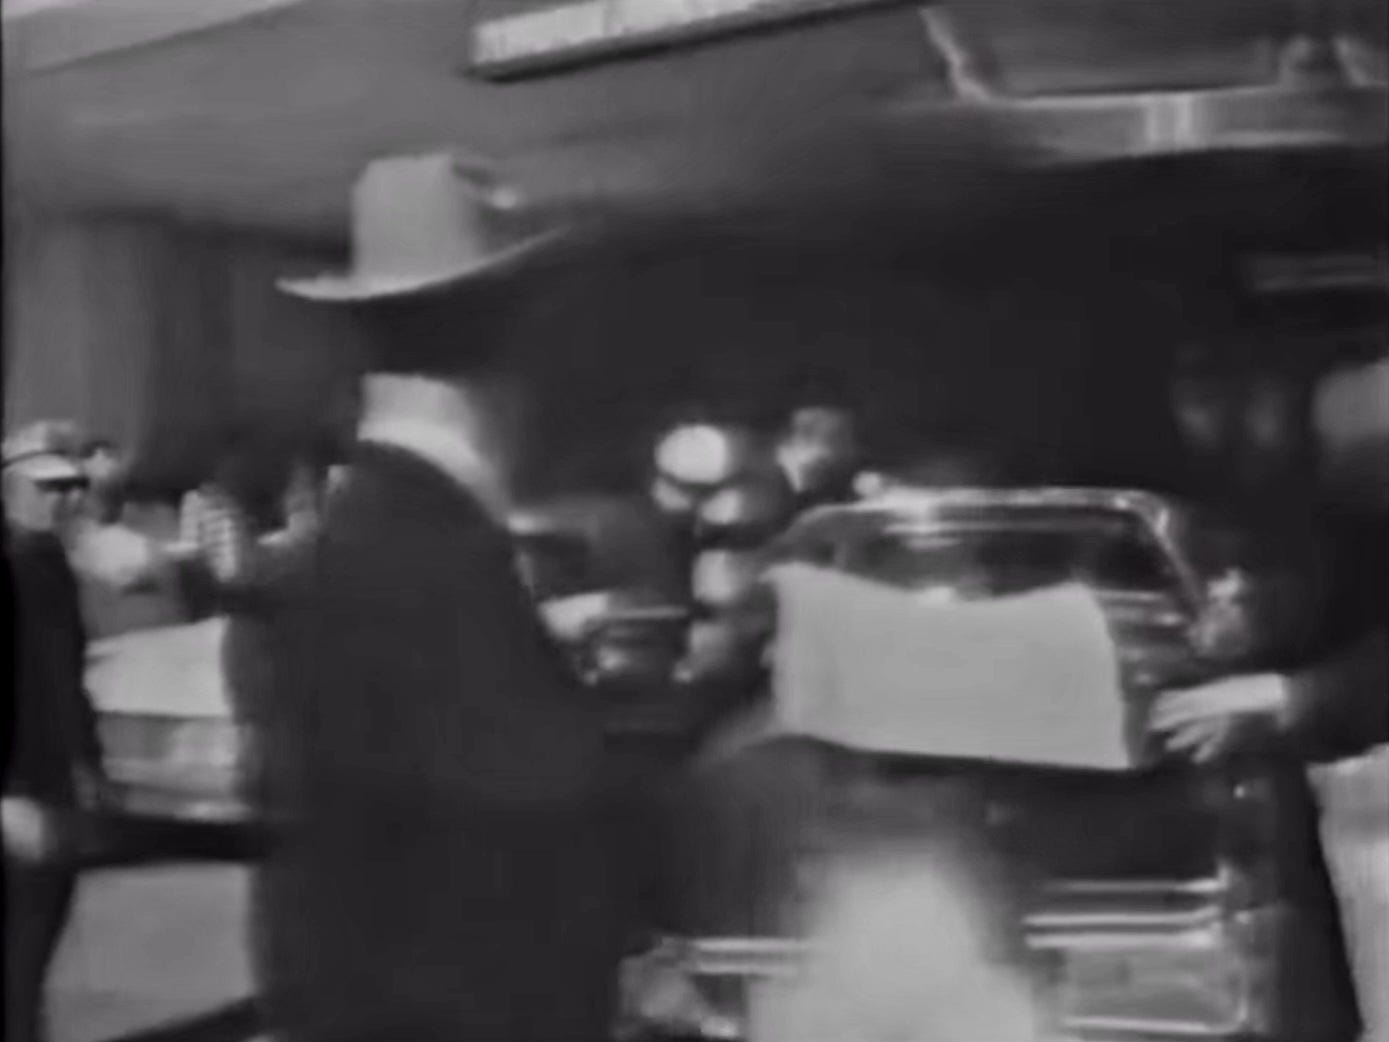 Frame from the Wiegman film showing fabric coverings being placed on the limousine's roof components just after the staff secretaries passed it.